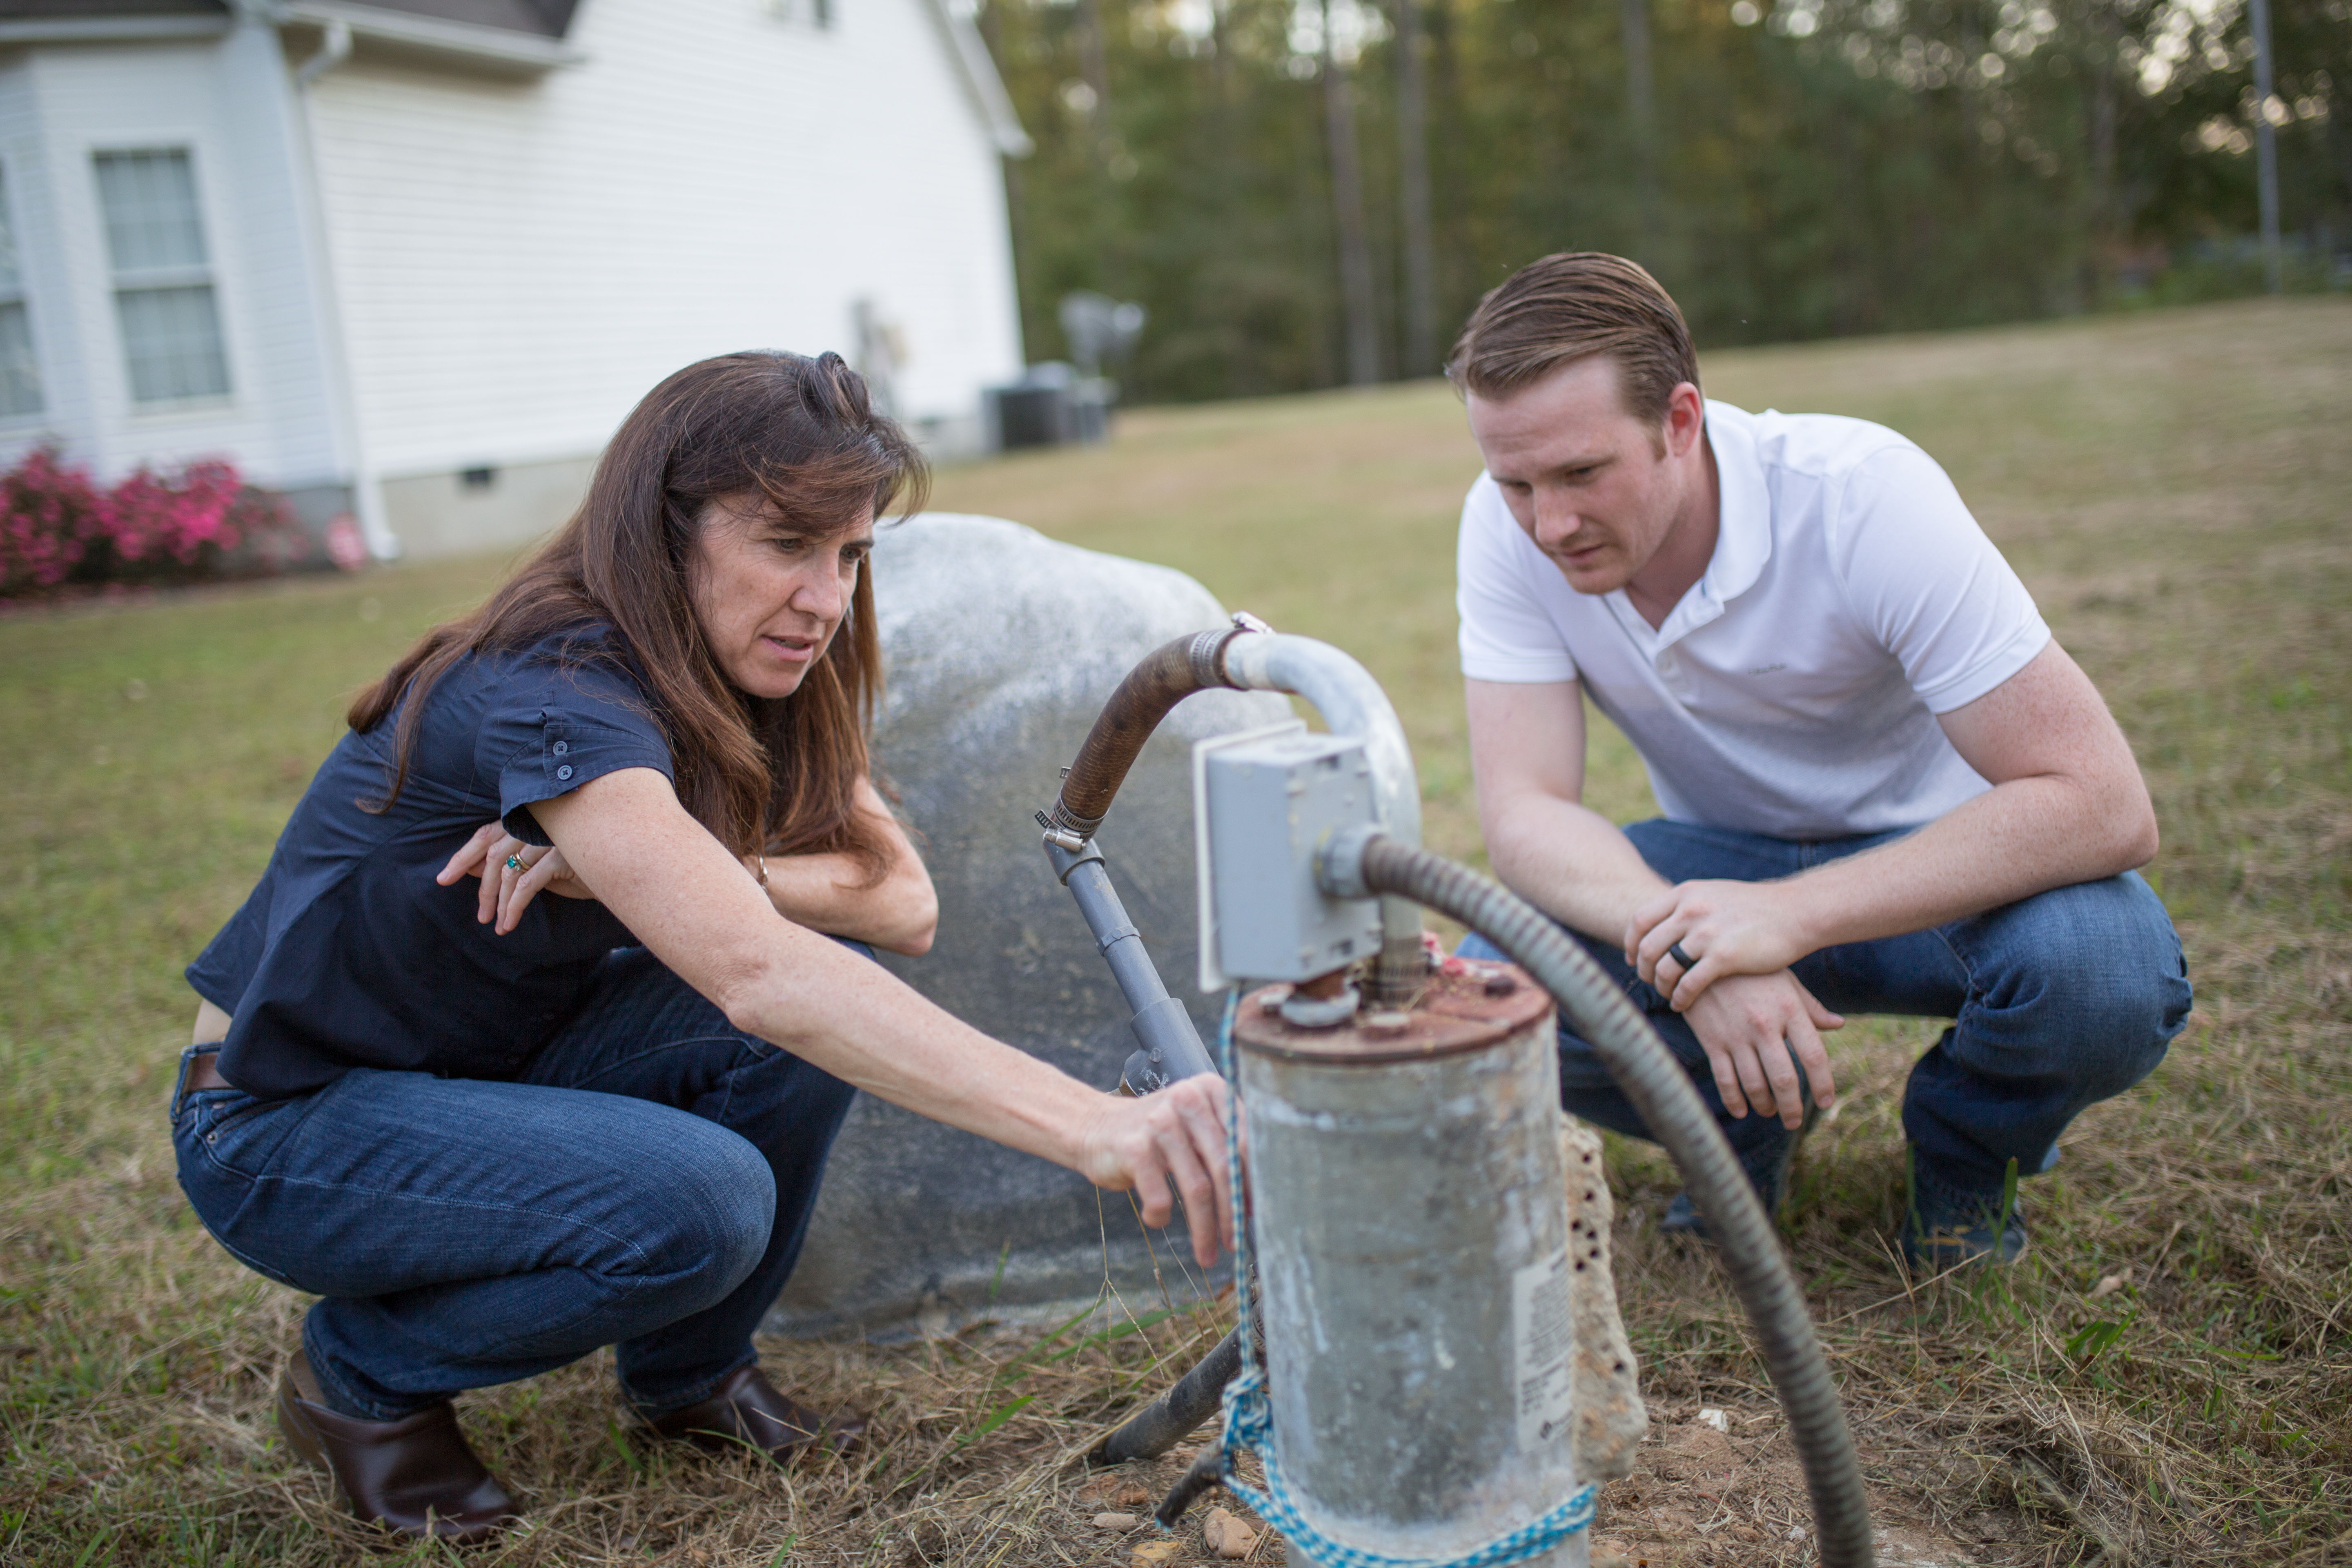 Jacqueline MacDonald Gibson and Frank Stillo test the well water at a home just outside city limits in Wake County.